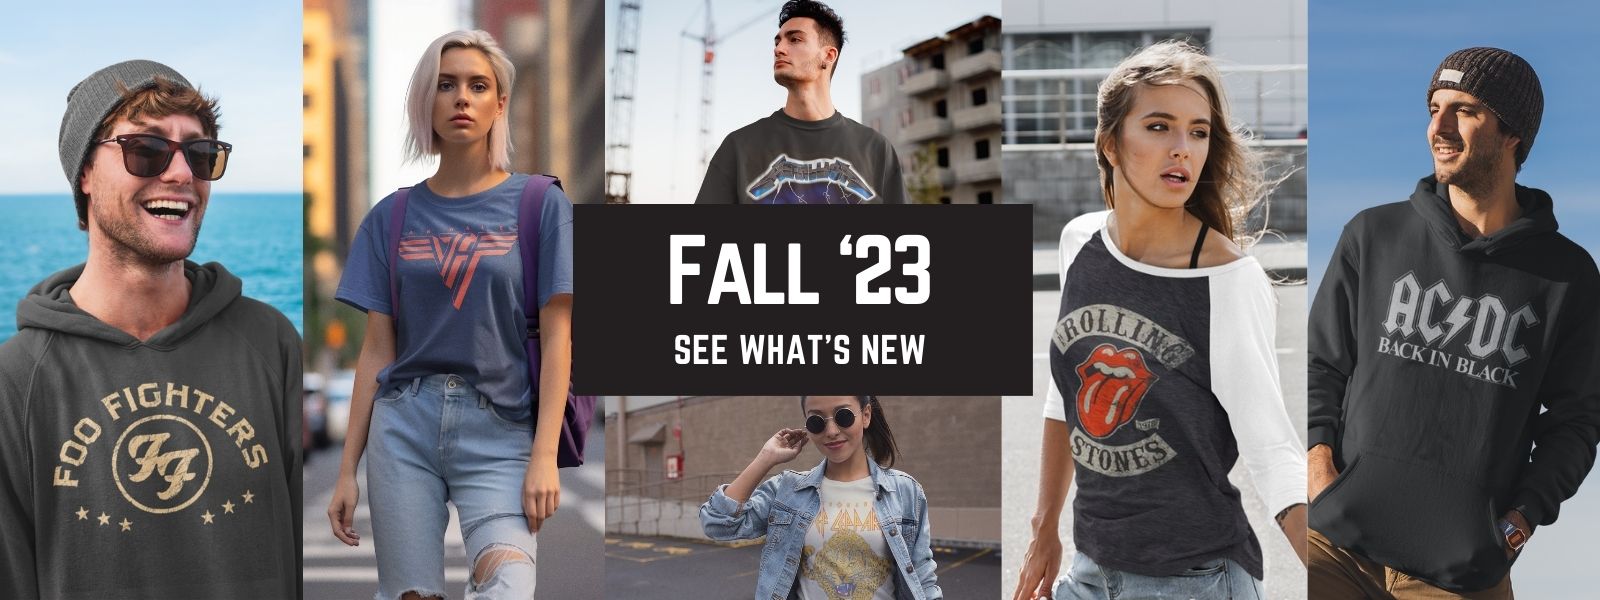 Fall 2023 Band Shirts and Merchandise